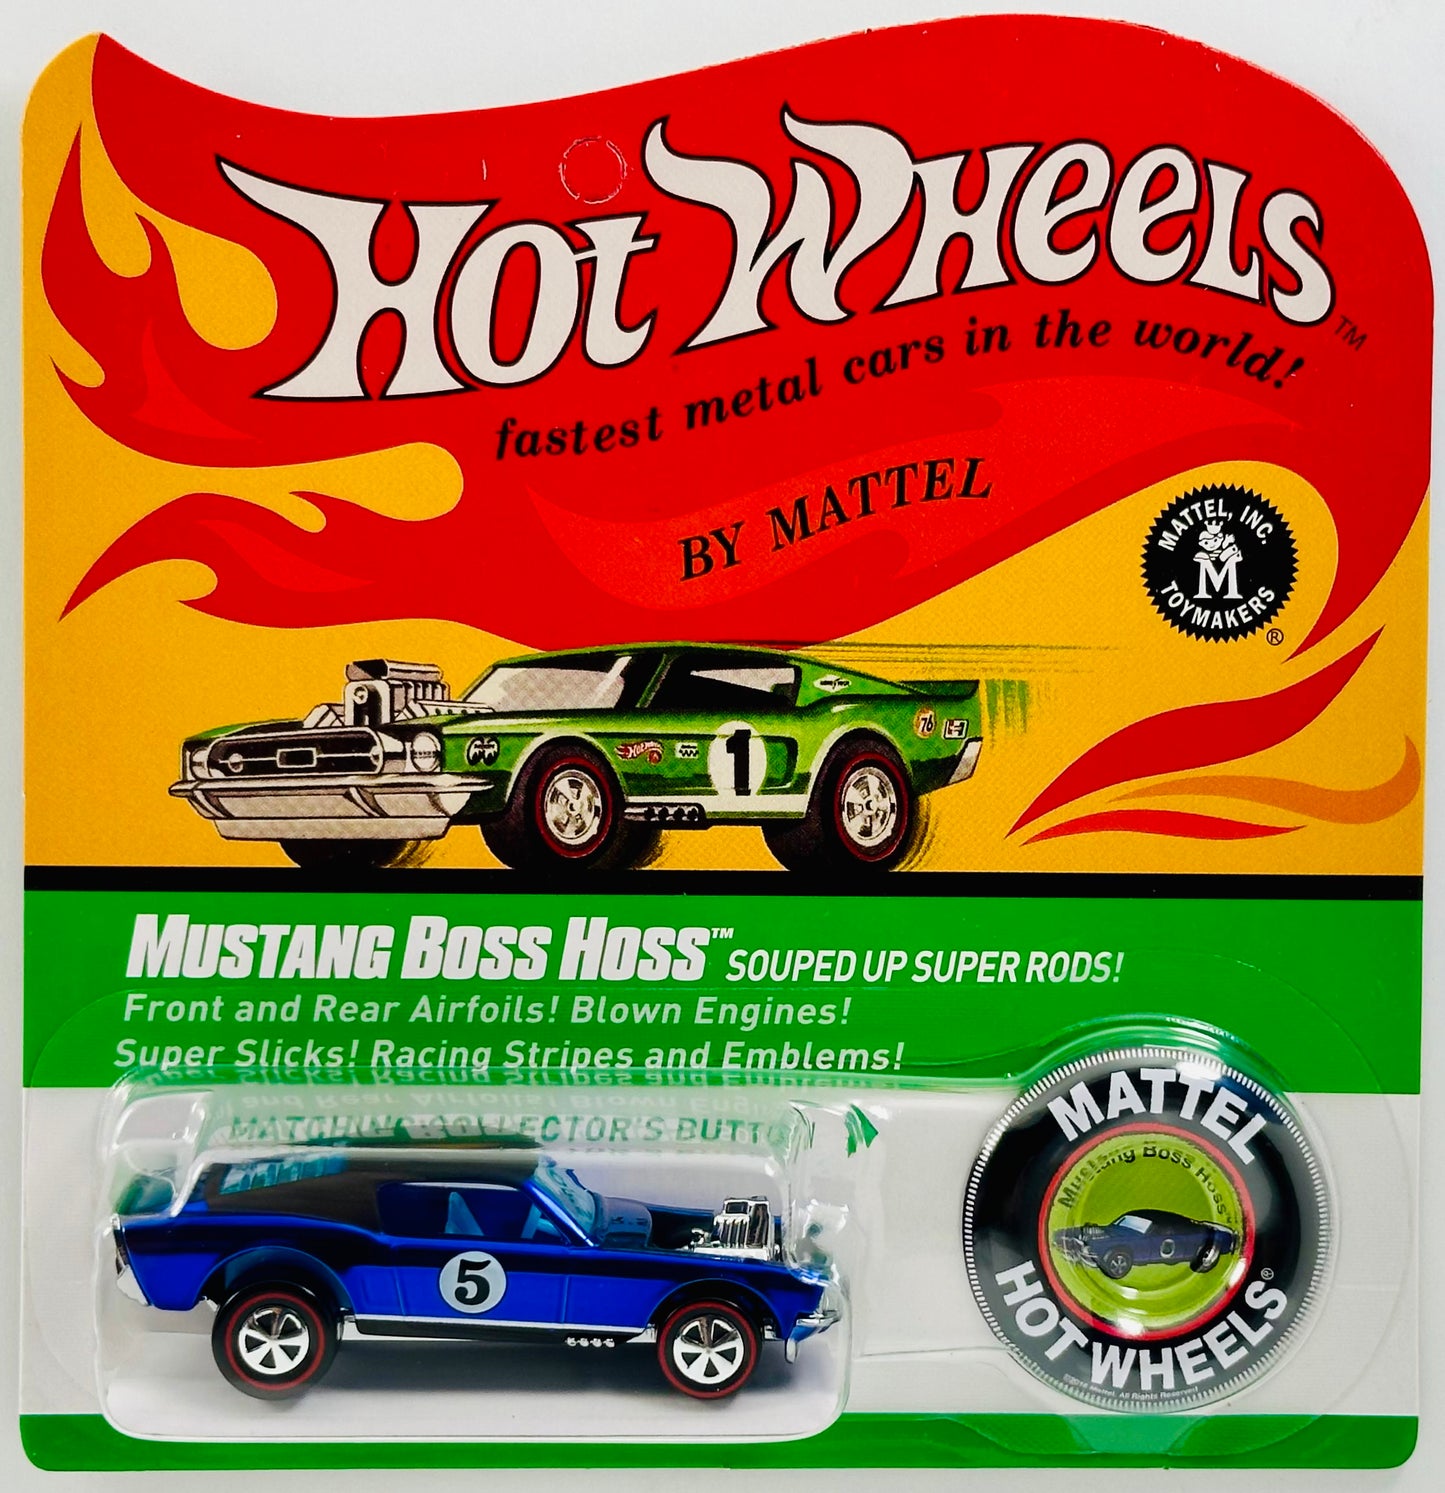 Hot Wheels 2017 - HWC Spoilers - Mustang Boss Hoss - Spectraflame Blue - '5' - Neo Classic Red Lines - Limited to 8,000